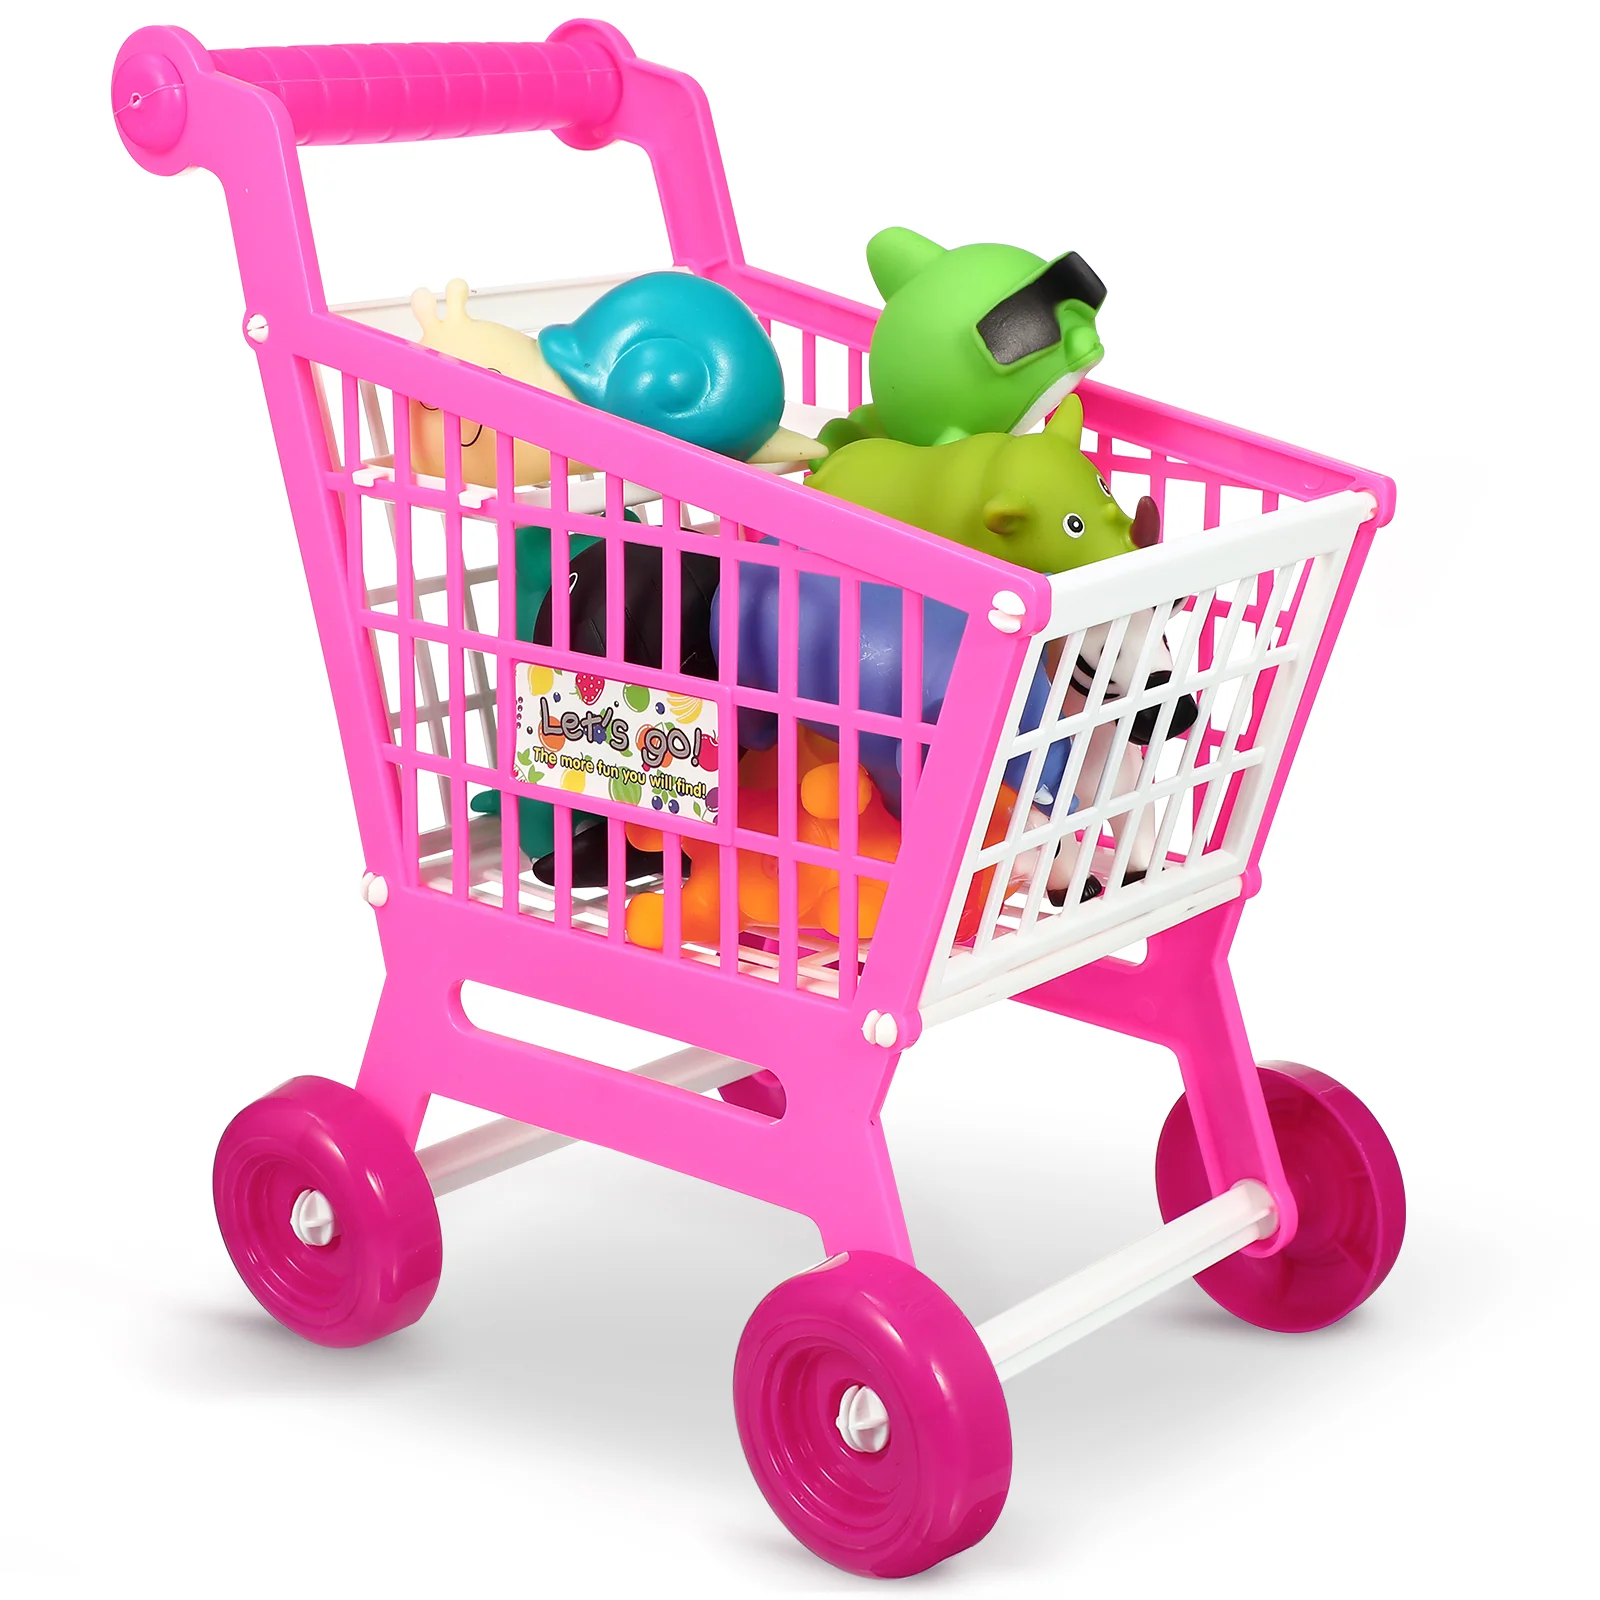 

Shopping Cart Toy for Kids Simulation Mini Supermarket Shopping Trolley for Toddlers Baby carriage dolls